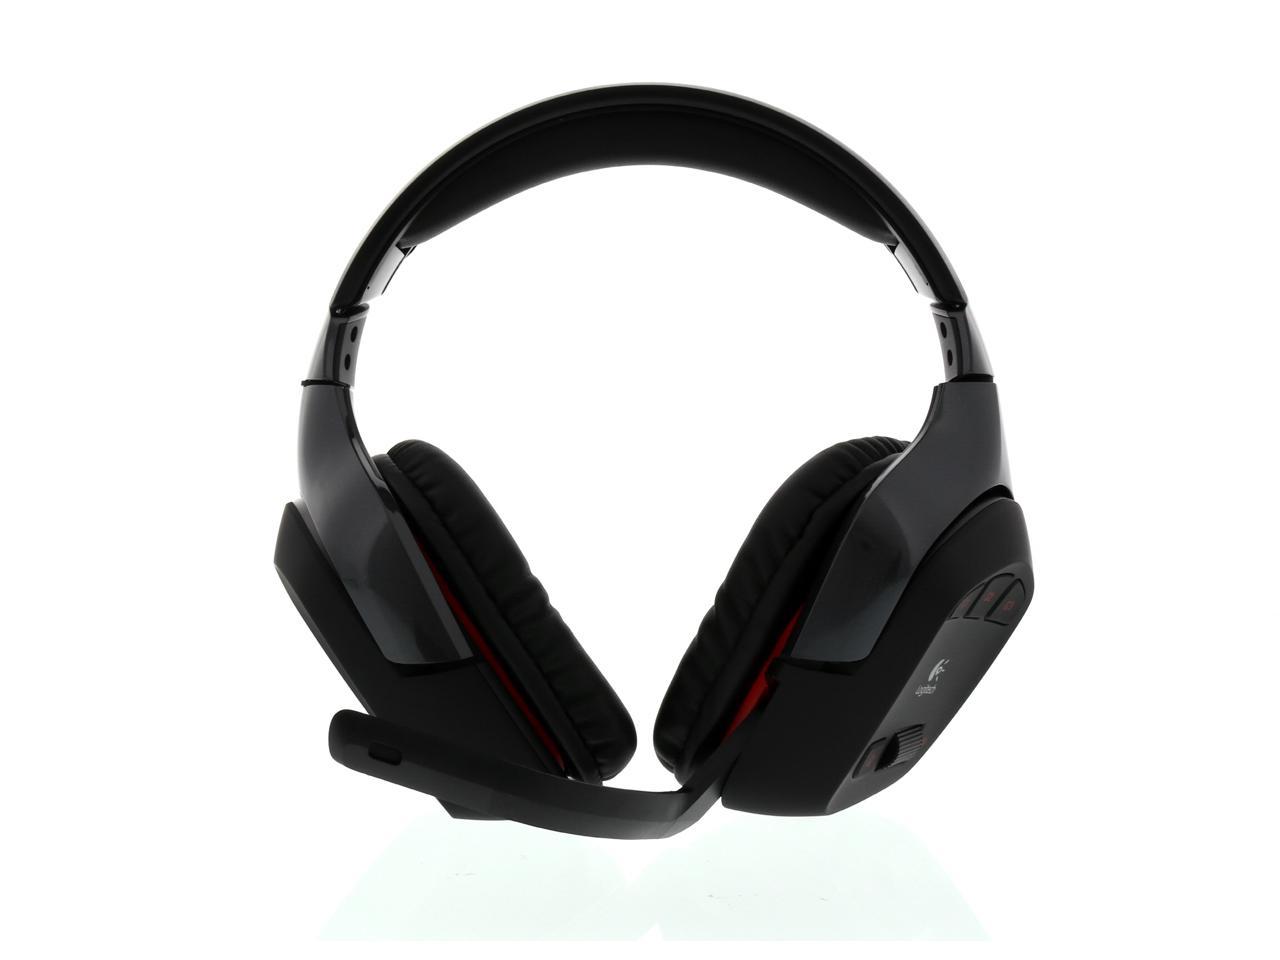 Logitech Wireless Gaming Headset G930 With 7 1 Surround Sound Wireless Headphones With Microphone Newegg Com